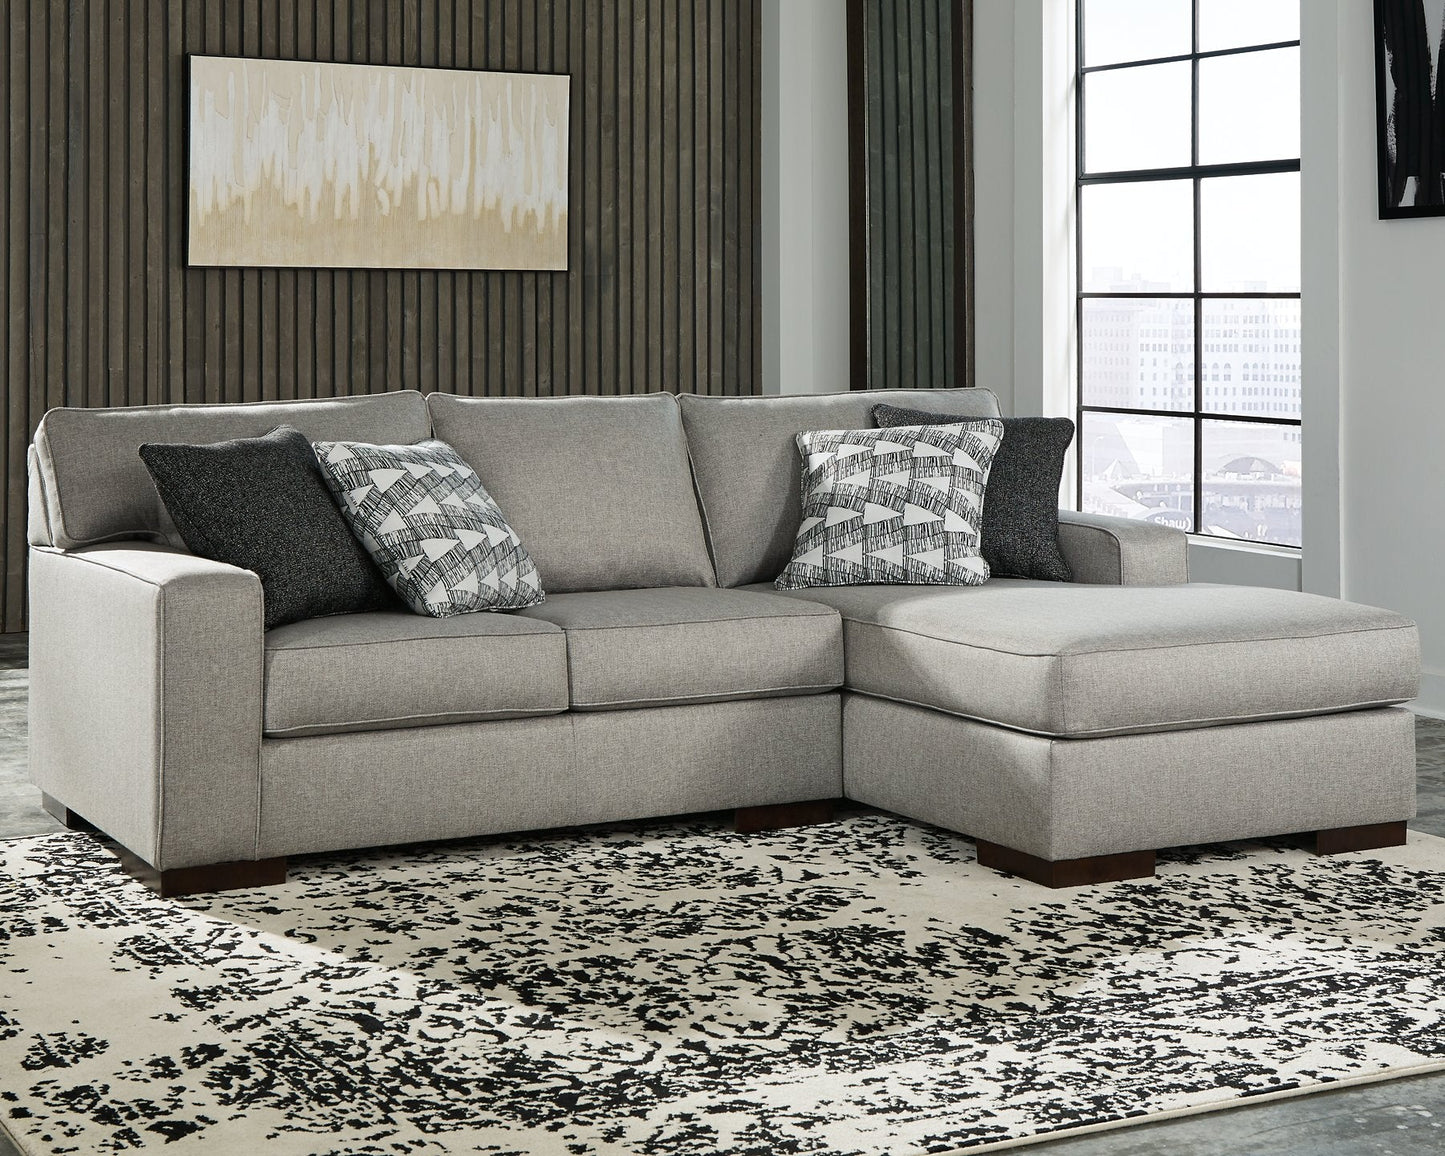 Marsing Nuvella Benchcraft 2-Piece Sectional with Chaise image